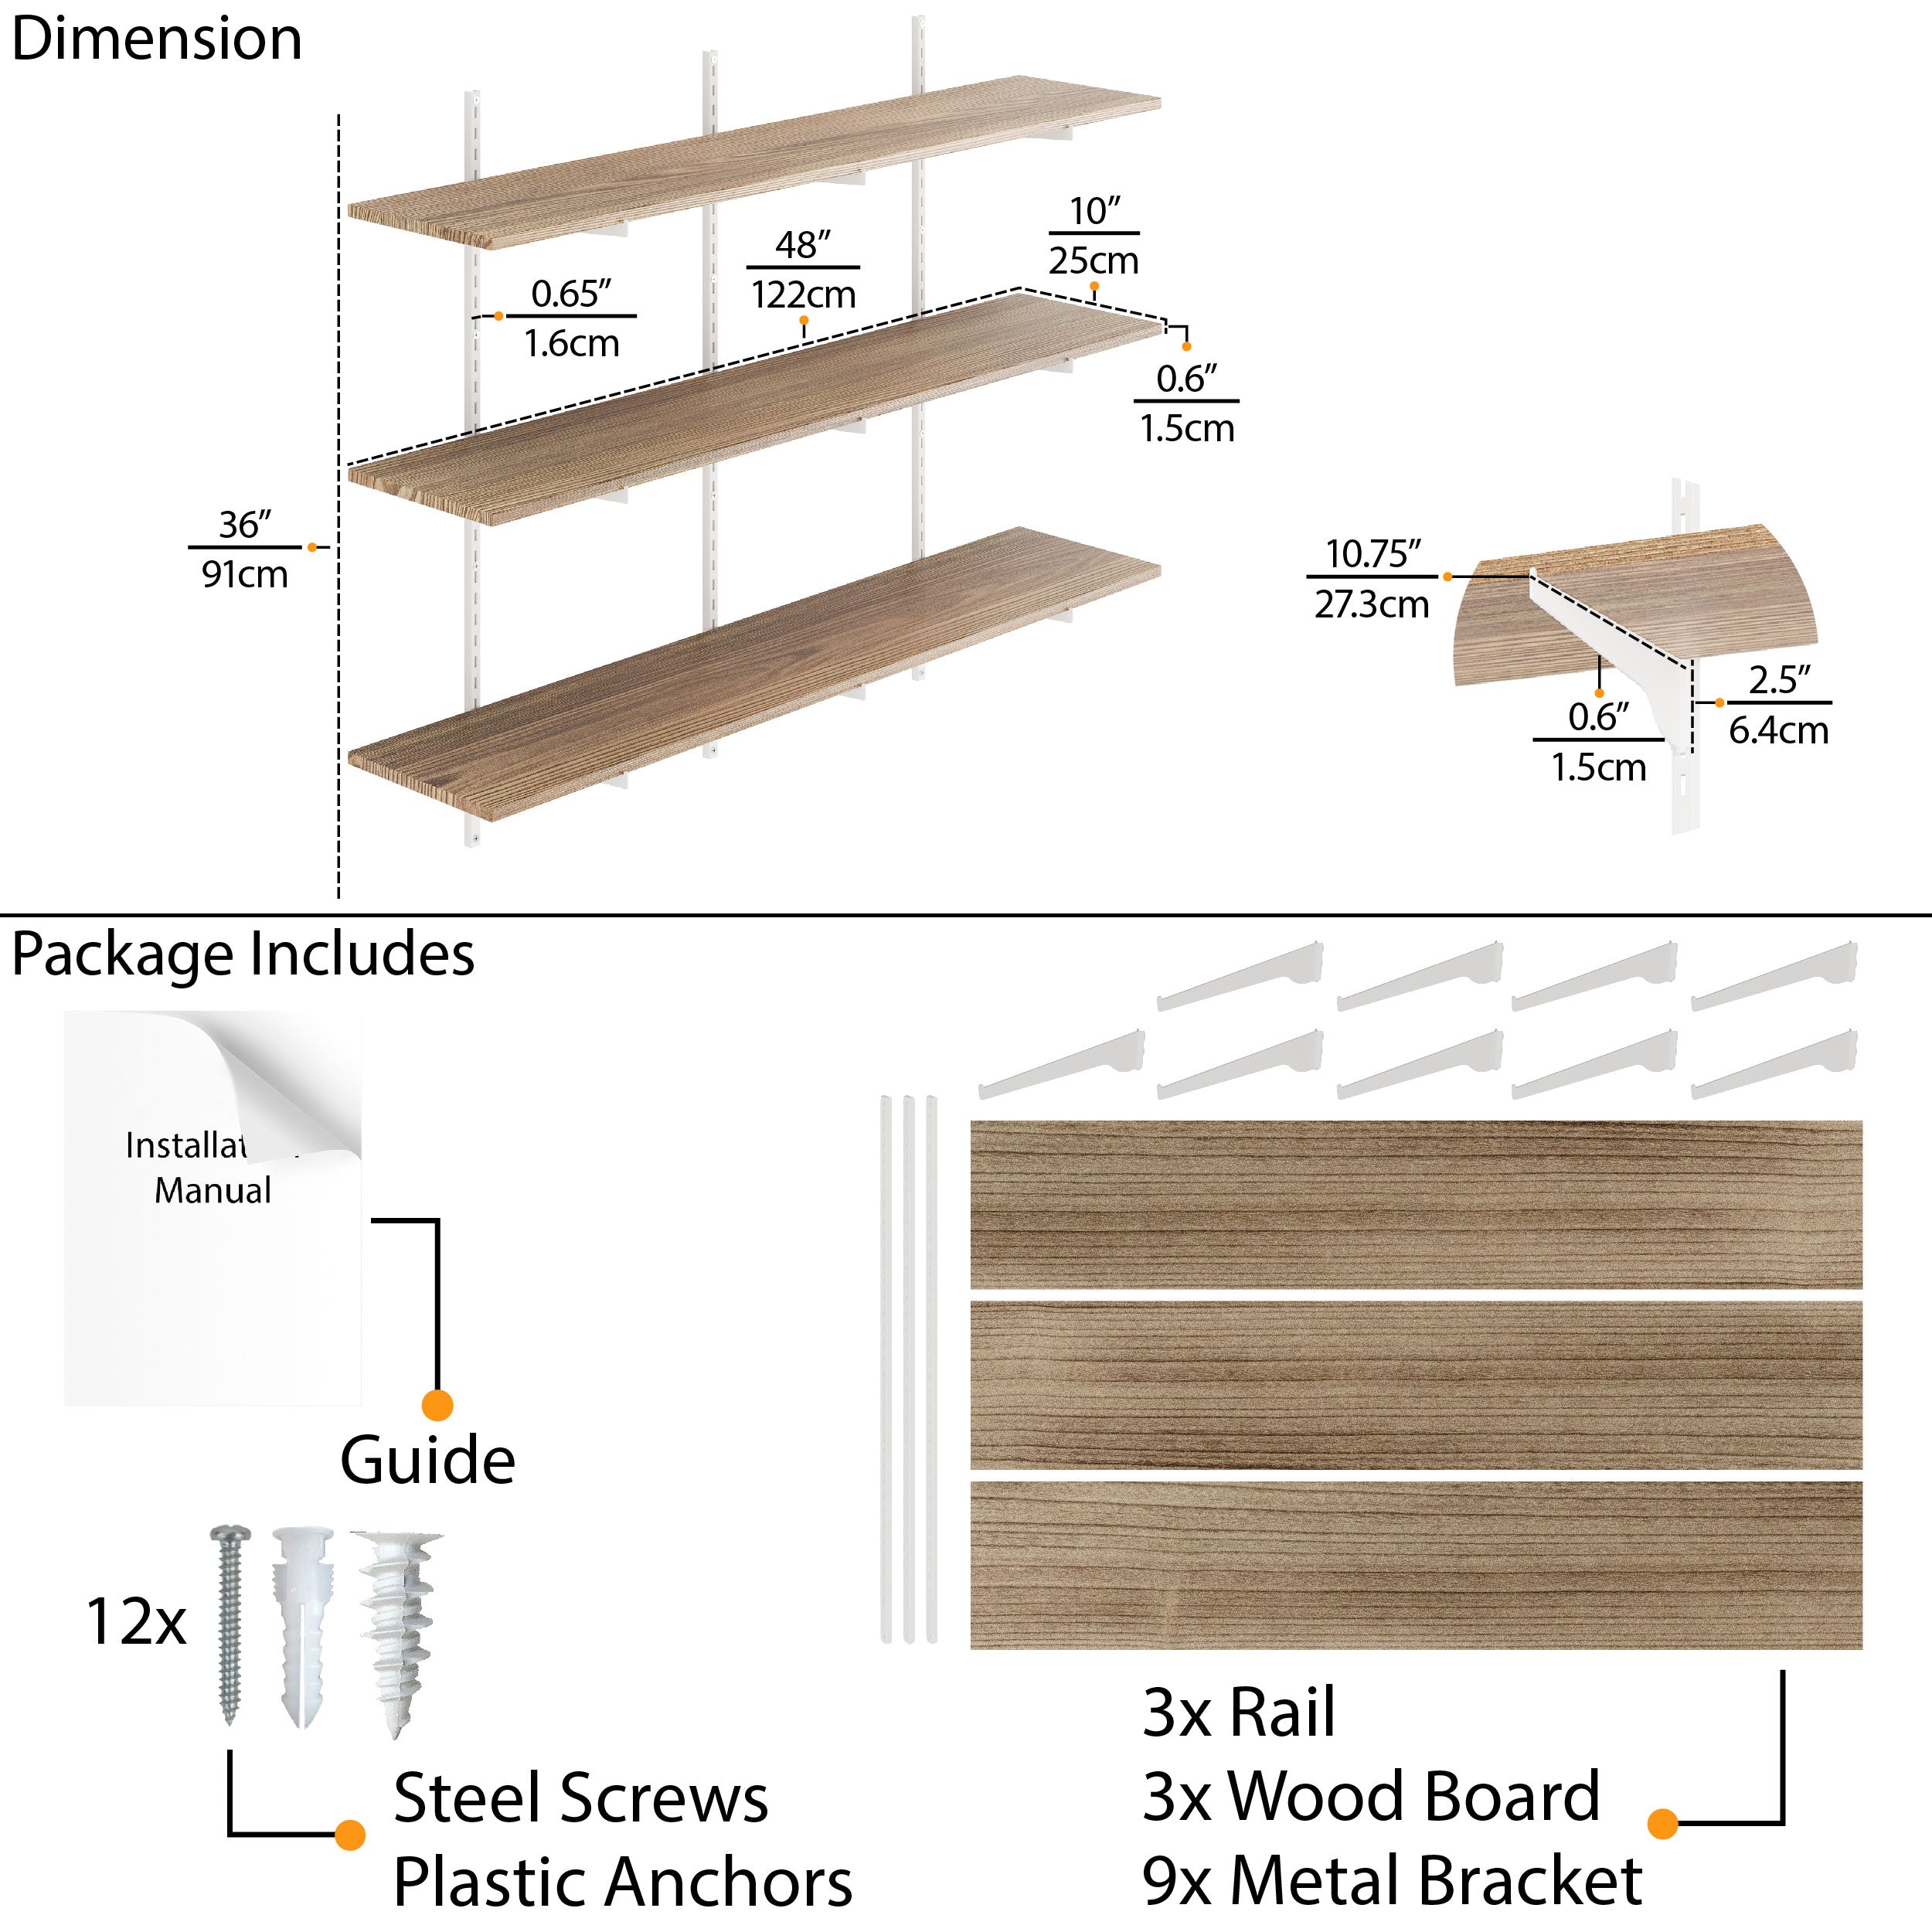 Detailed specifications of 48'' wooden floating shelves burnt with dimensions and package contents.